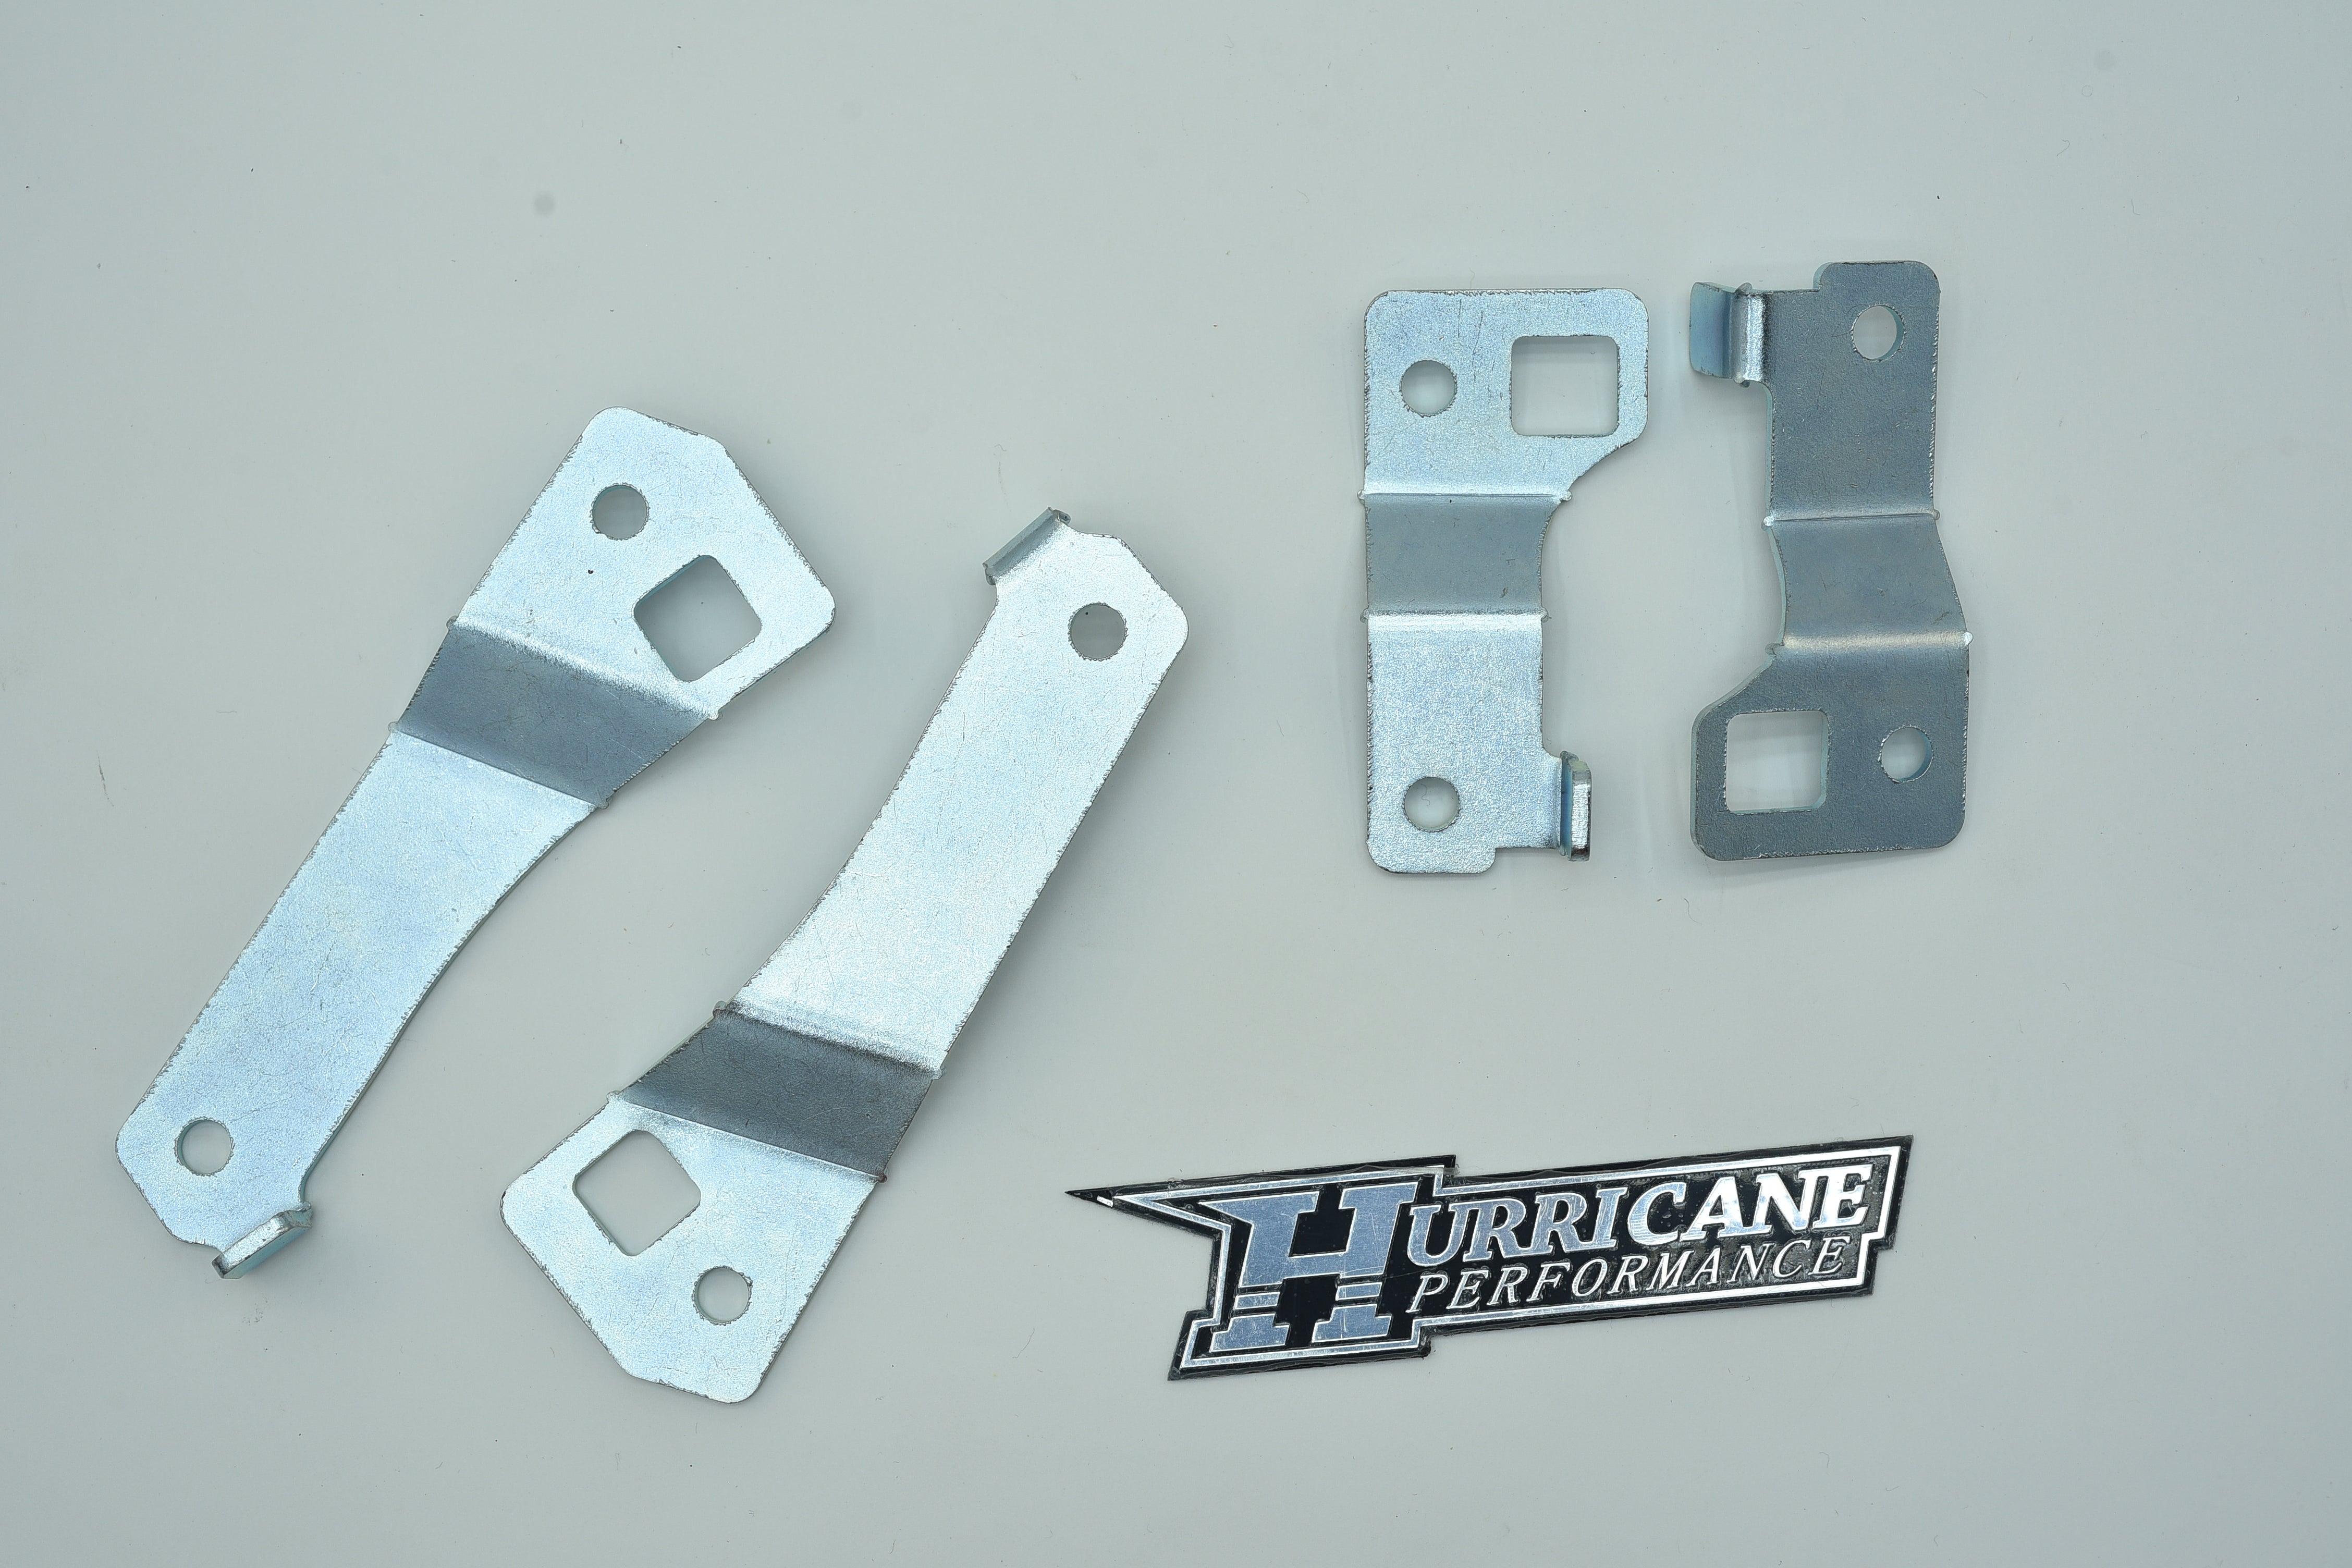 2.5" HURRICANE Base Lift Kit With out Spring Jeep Wrangler for JK